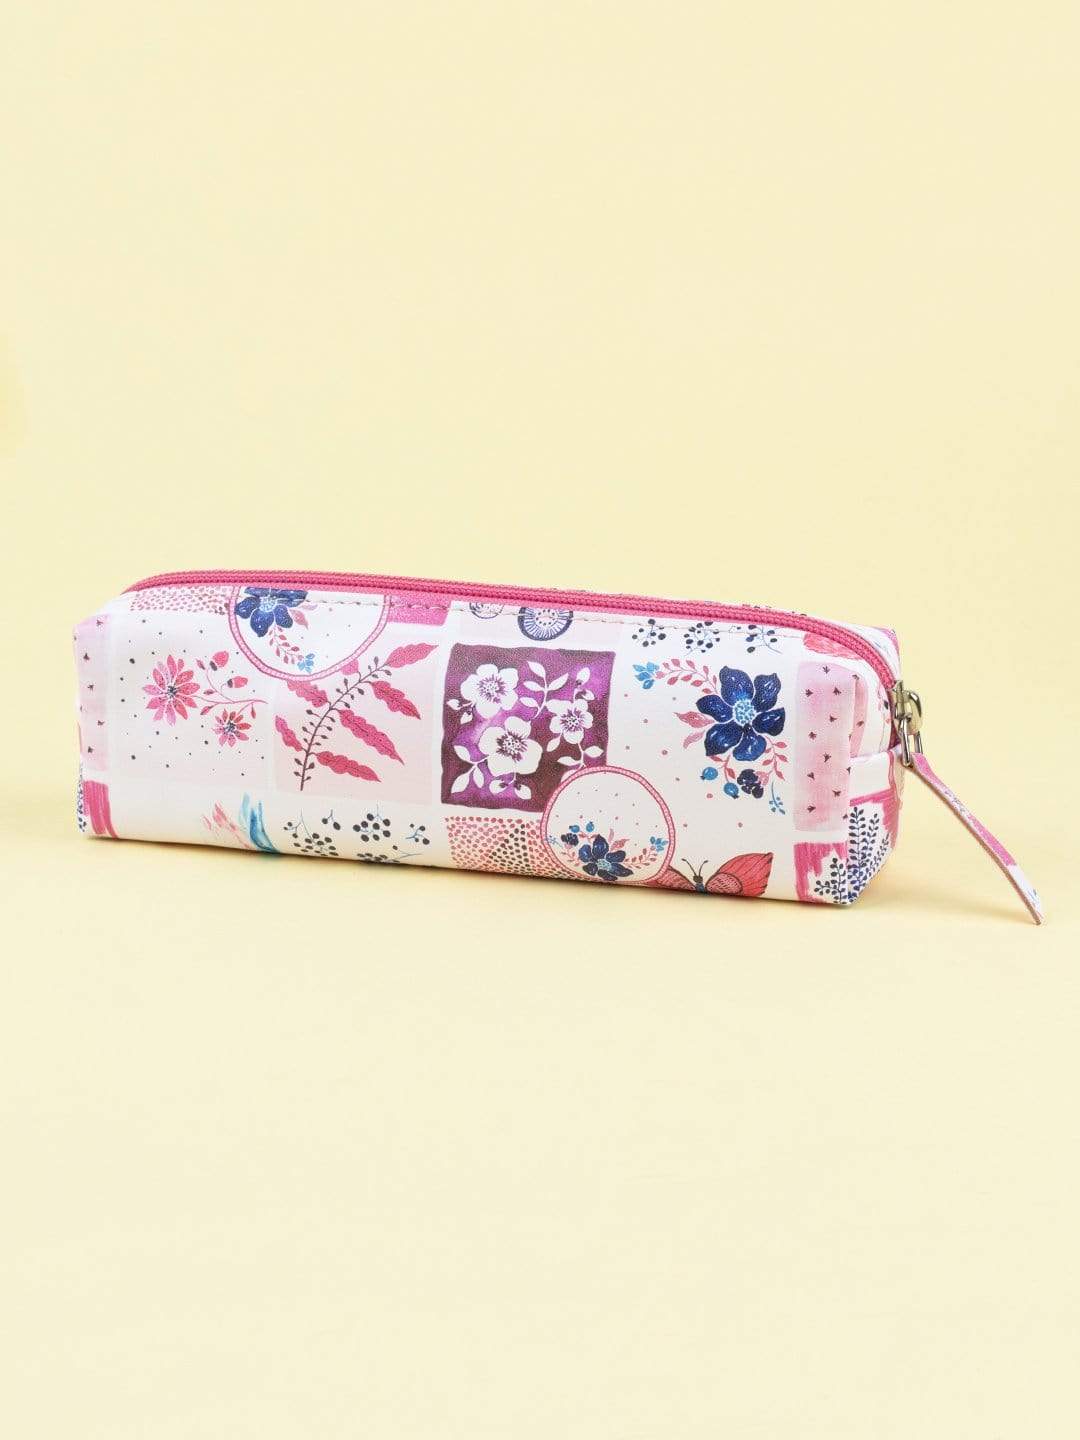 Kindred Spirits Handpainted Stationery Pouch